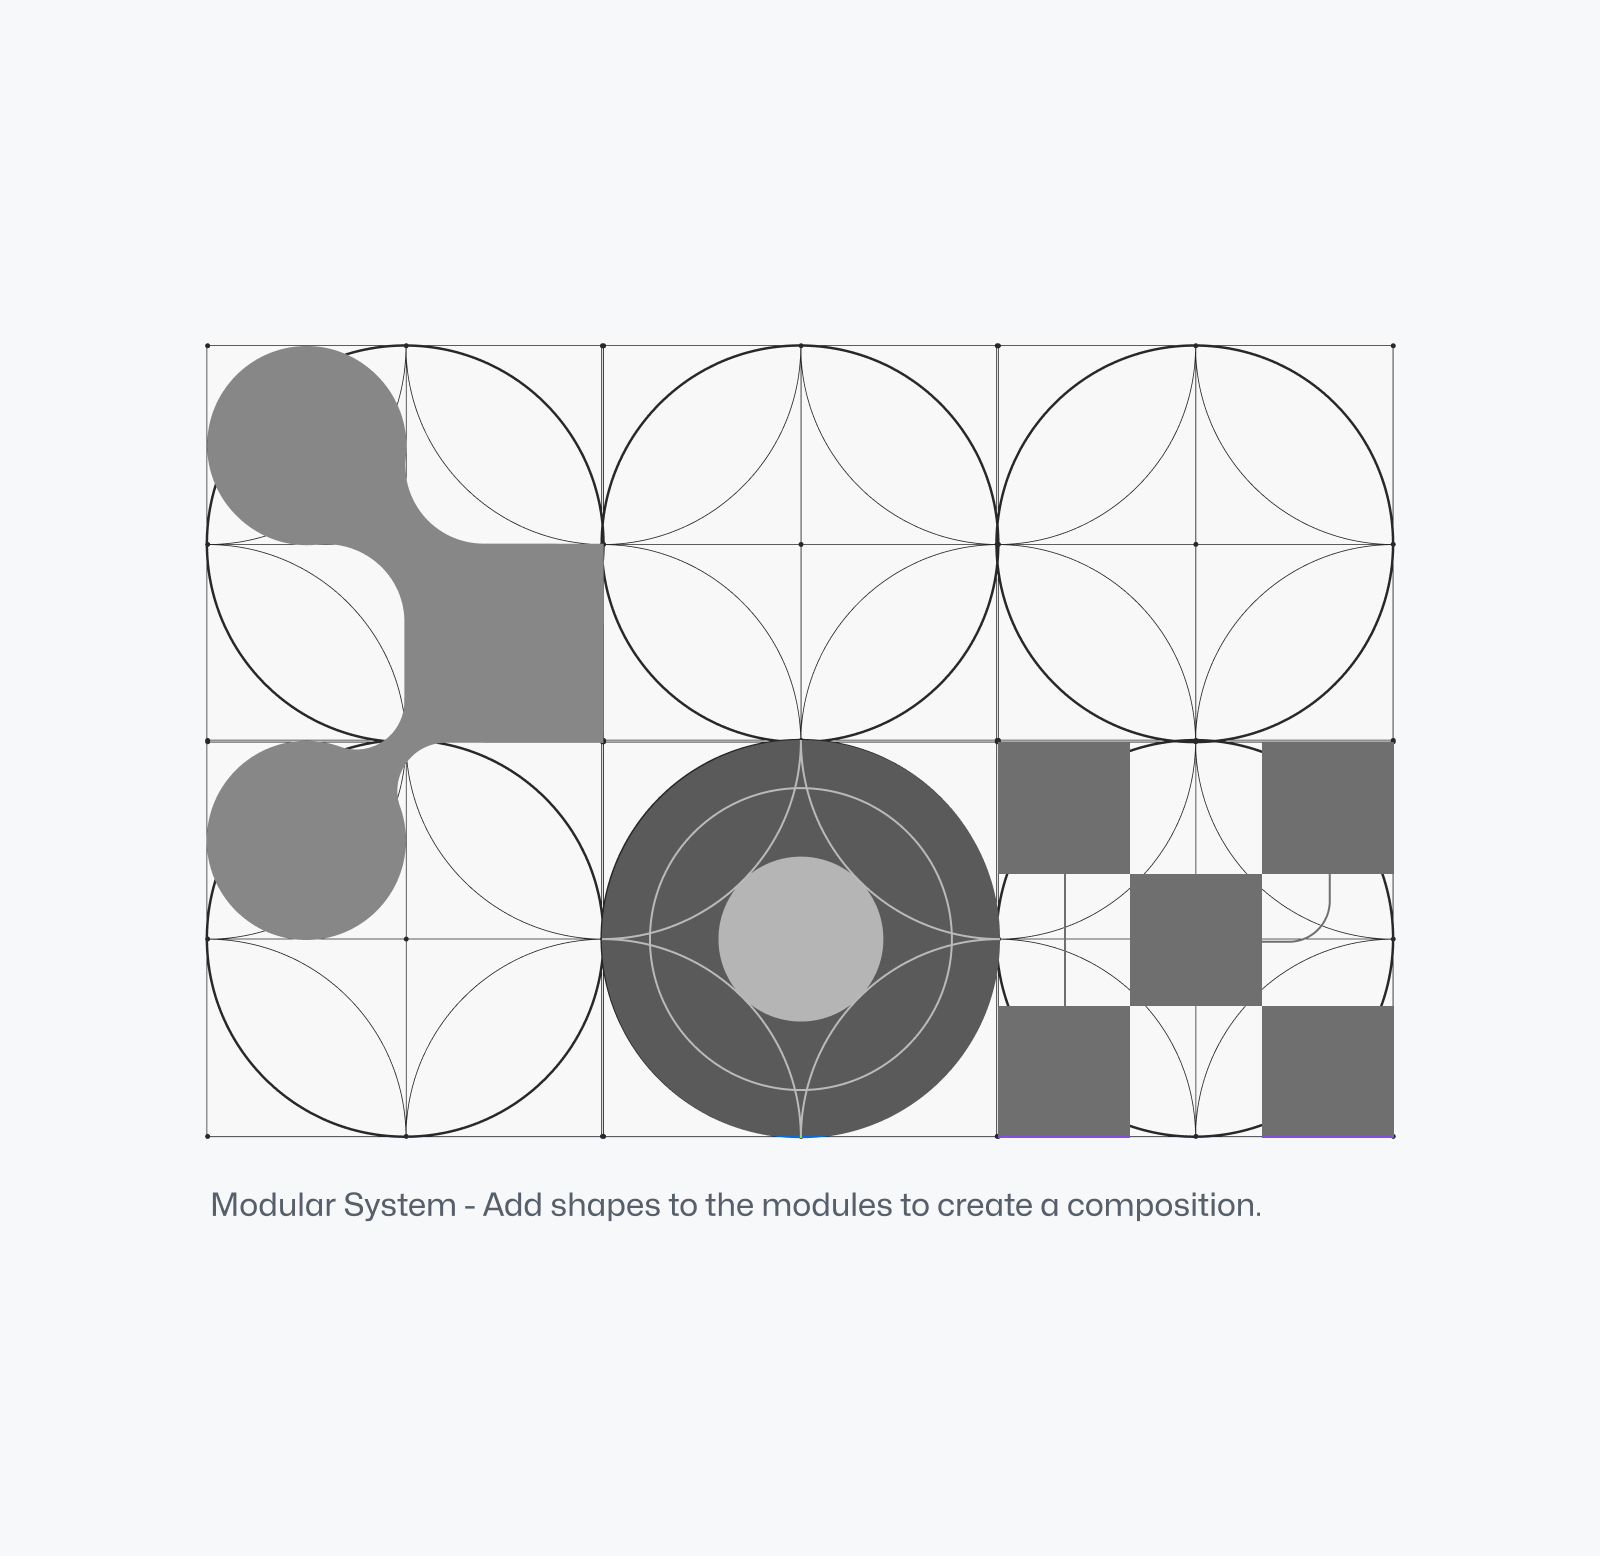 A circular grid structure with several abstract shapes drawn on top of it in dark gray. Text underneath reads "Modular System - Add shapes to the modules to create a composition."